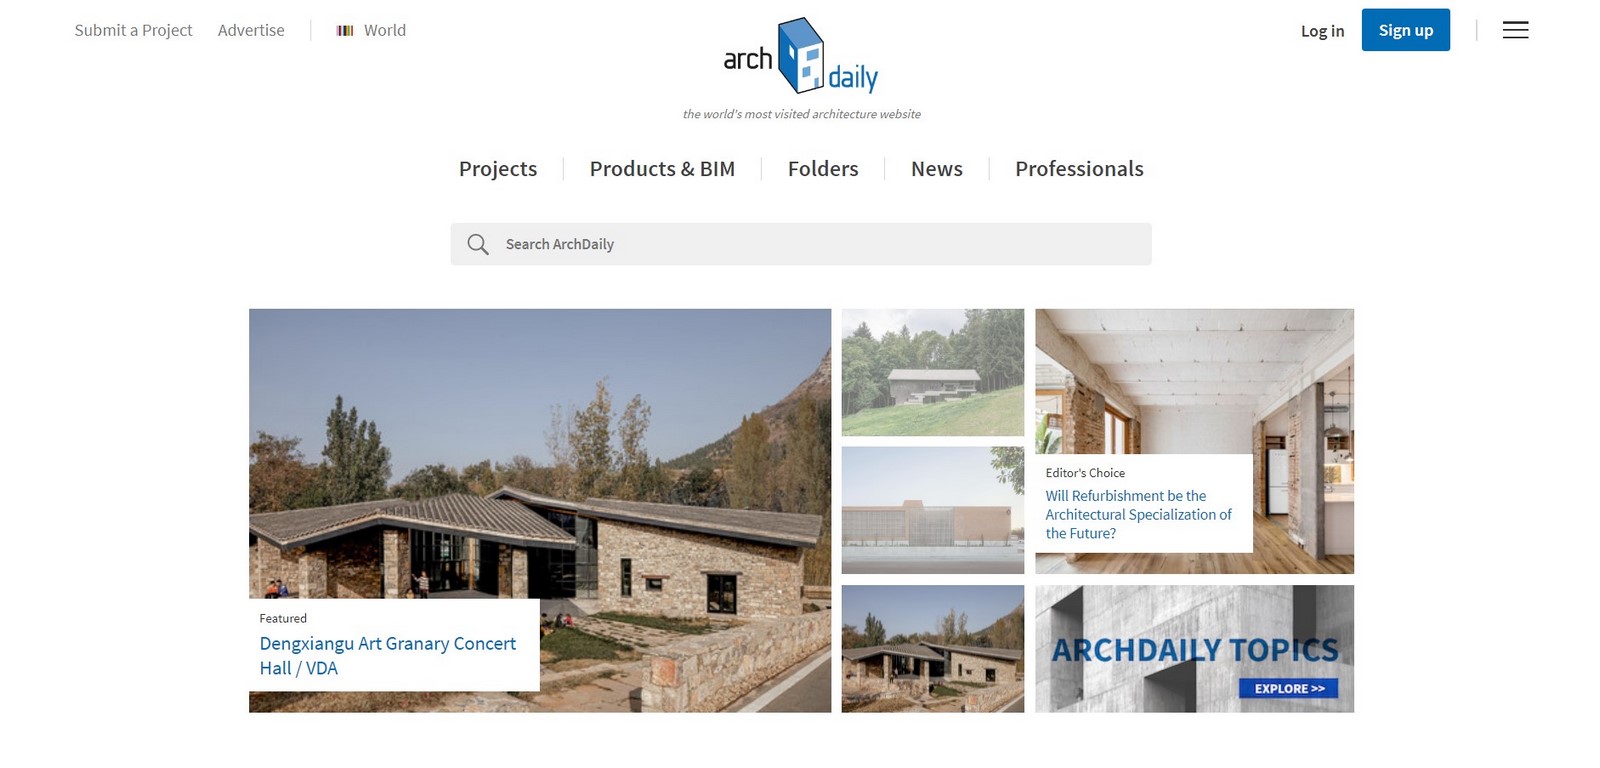 12 Websites That Can Aid Architectural Thesis Research - Sheet6